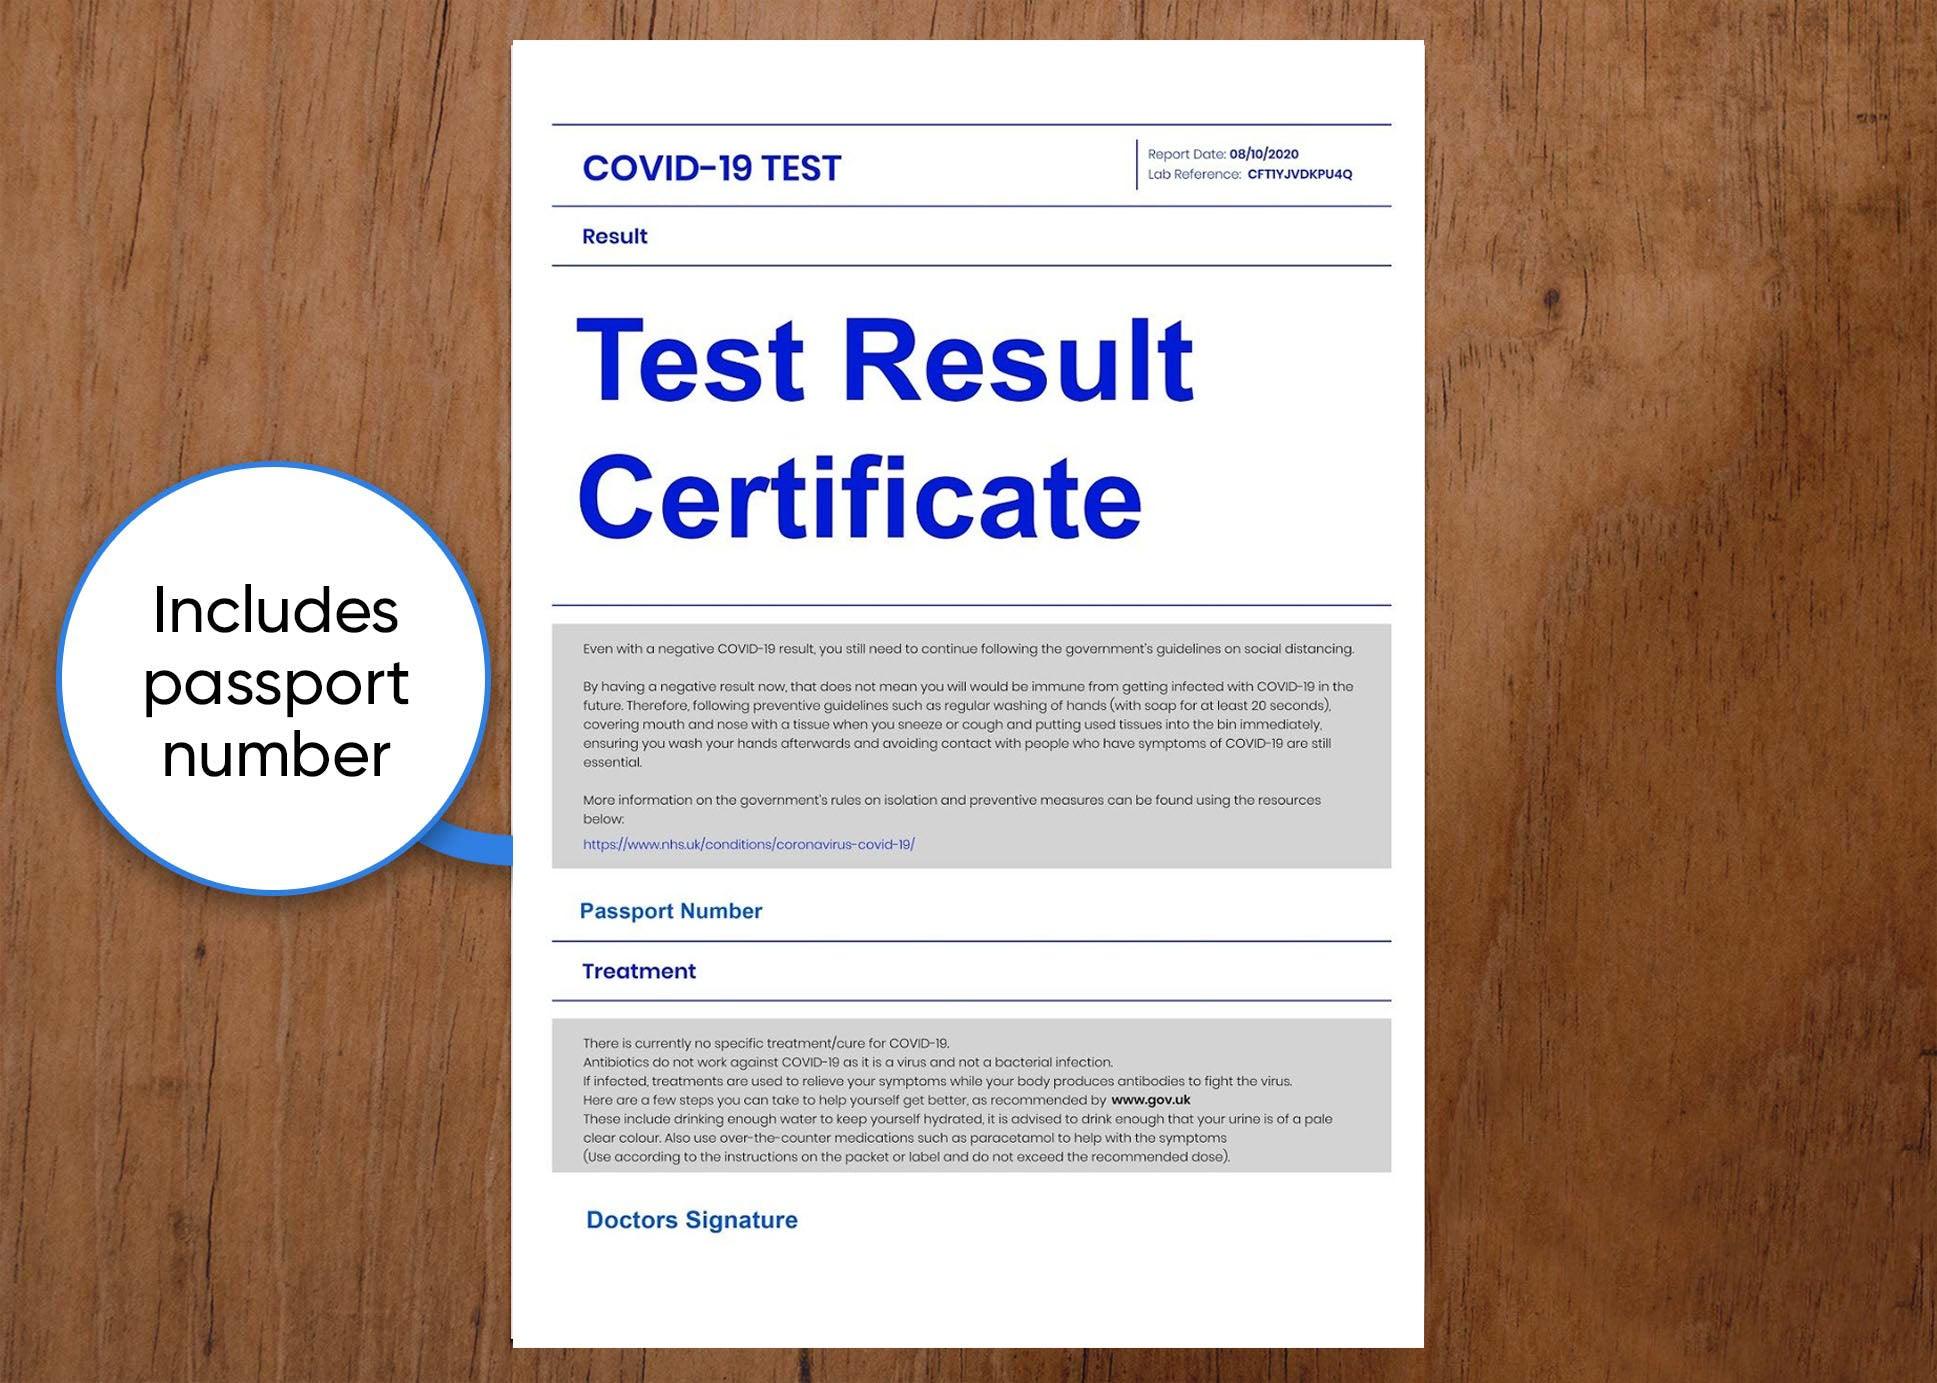 FIT TO FLY COVID TEST - ANTIGEN TEST & CERTIFICATE FOR TRAVEL GUARANTEED